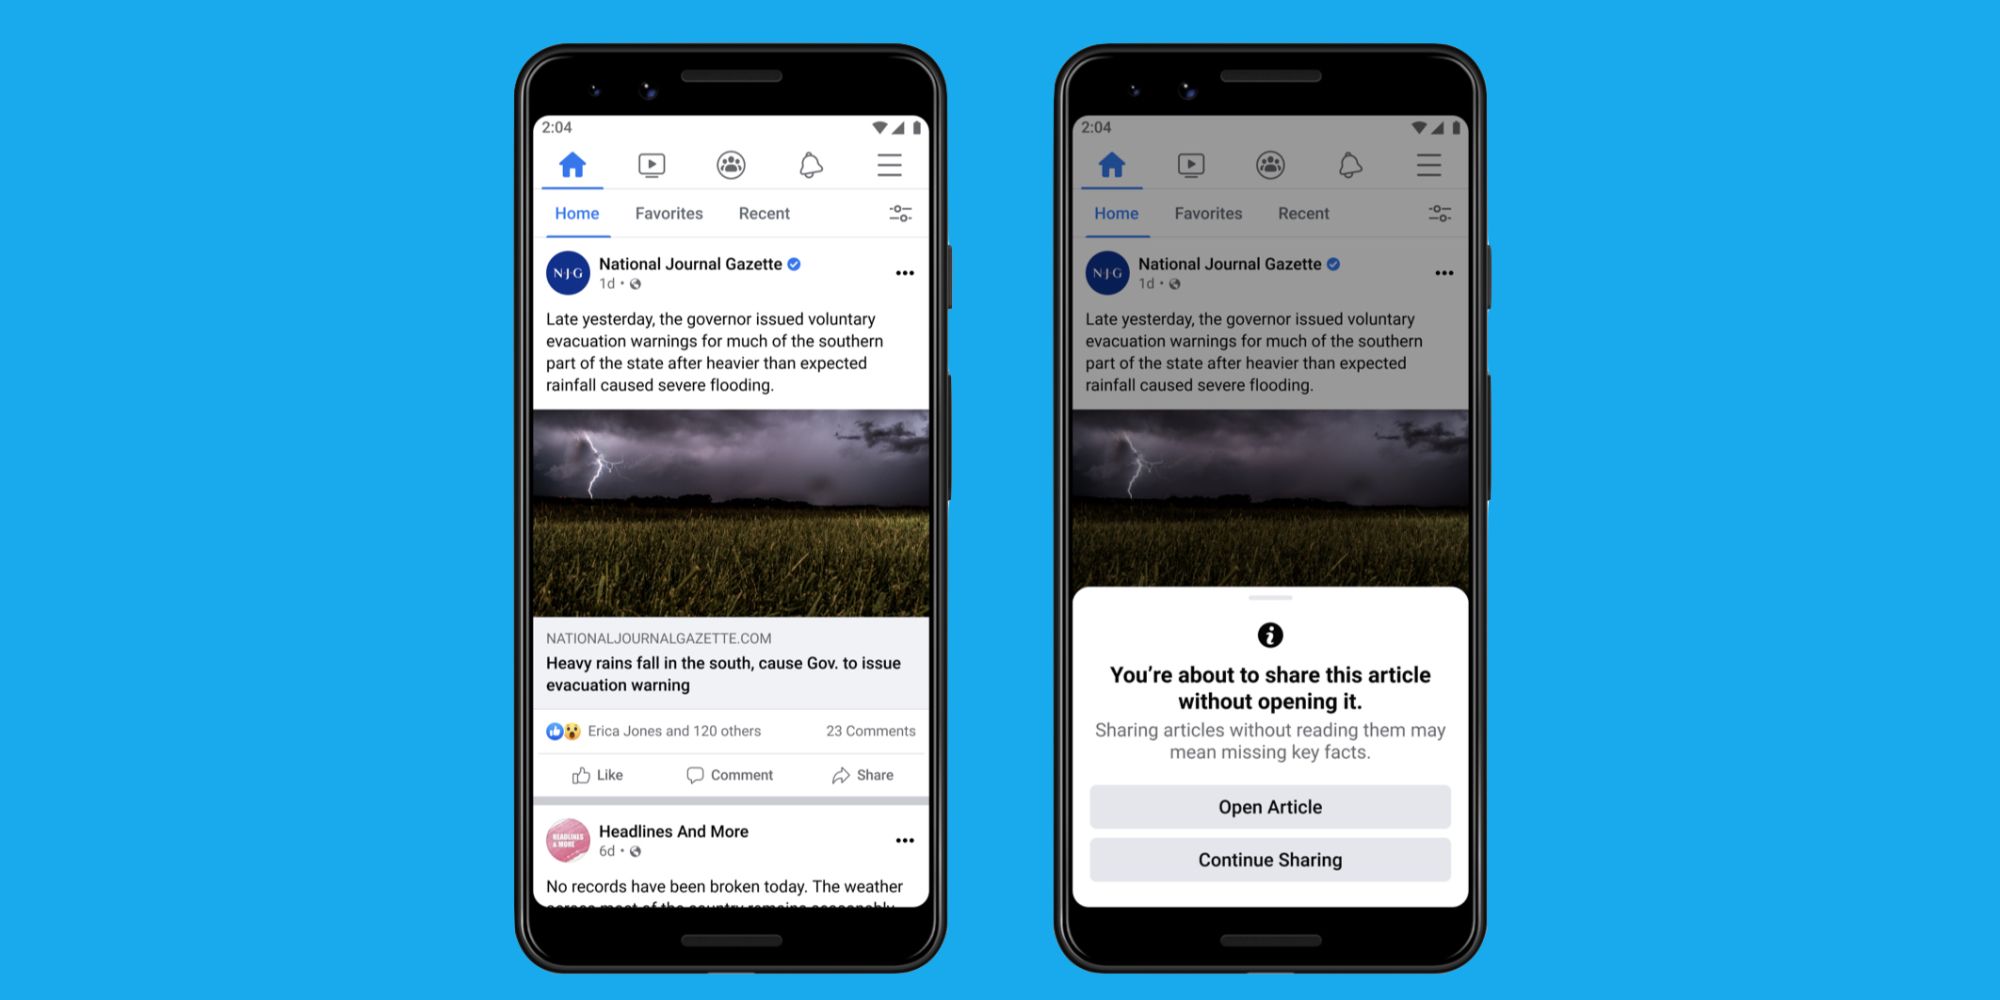 Facebook's new read before sharing prompt